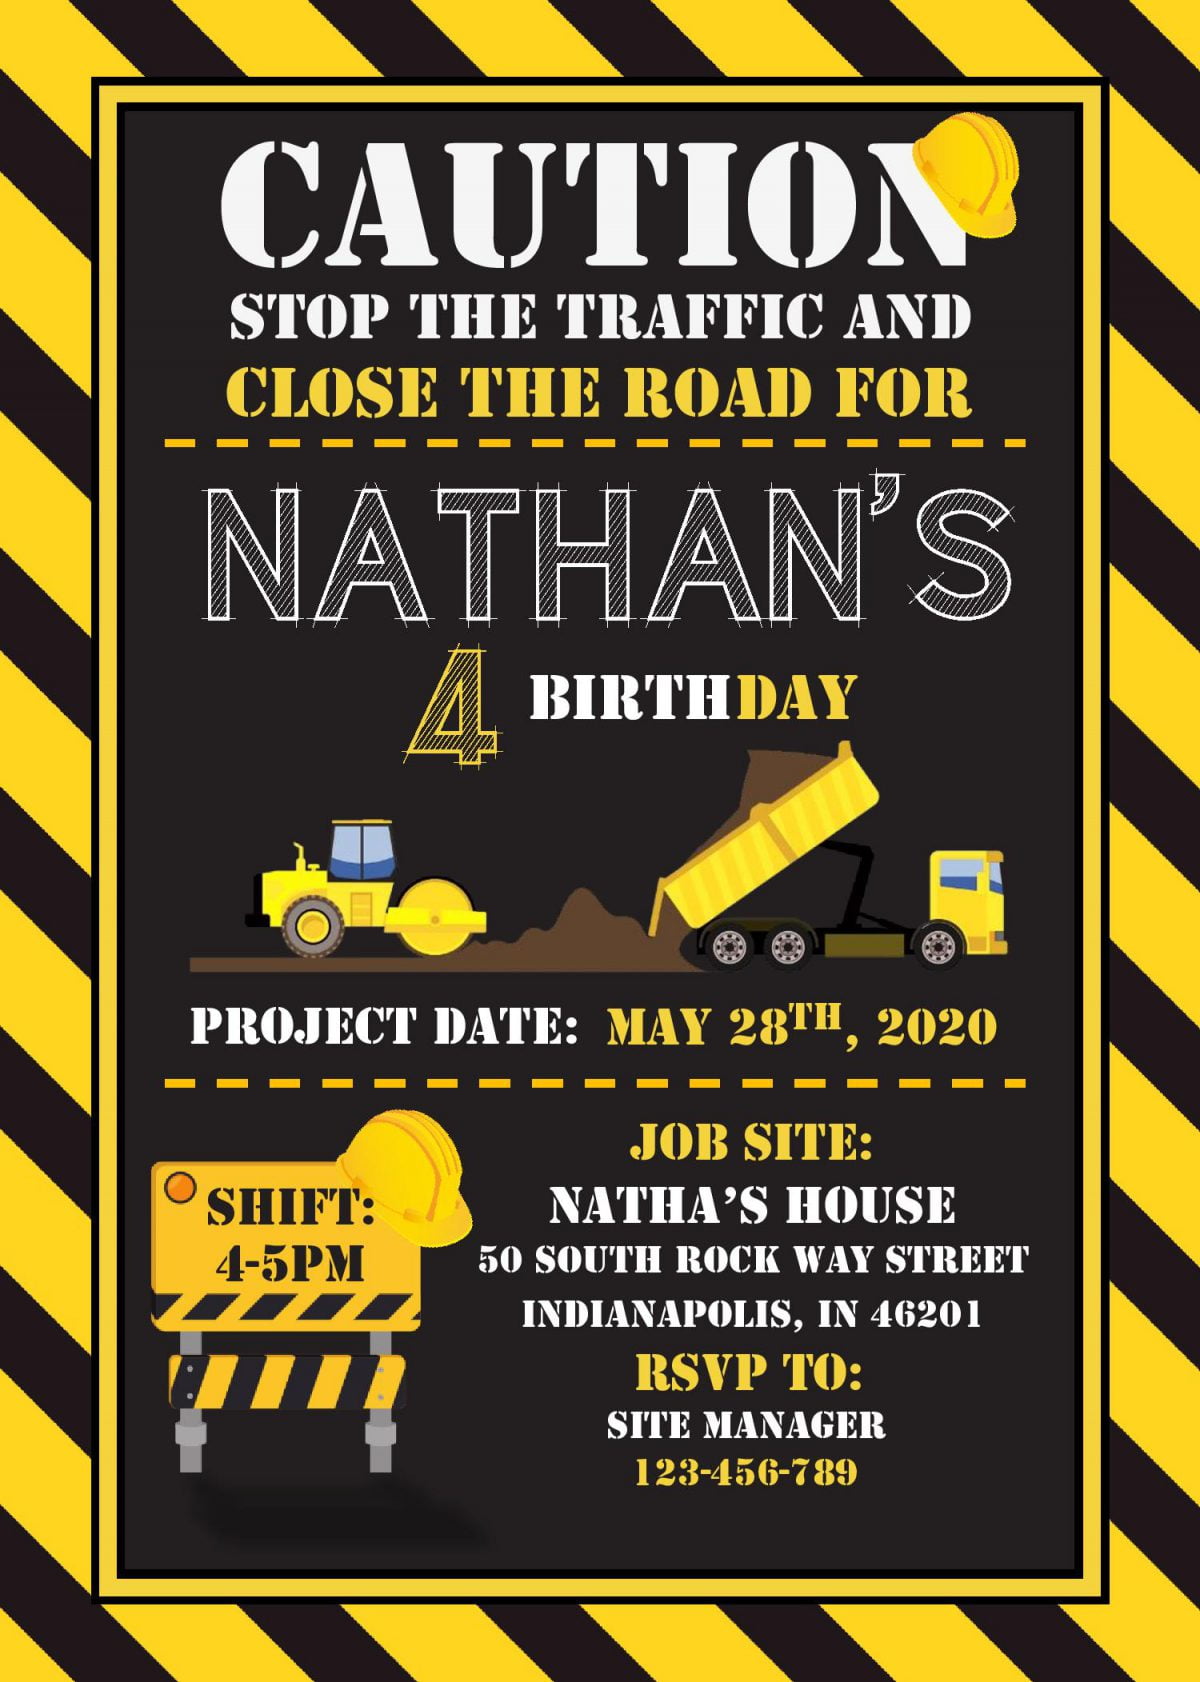 Construction Birthday Invitation Templates - Editable With MS Word and has super cool trucks clipart